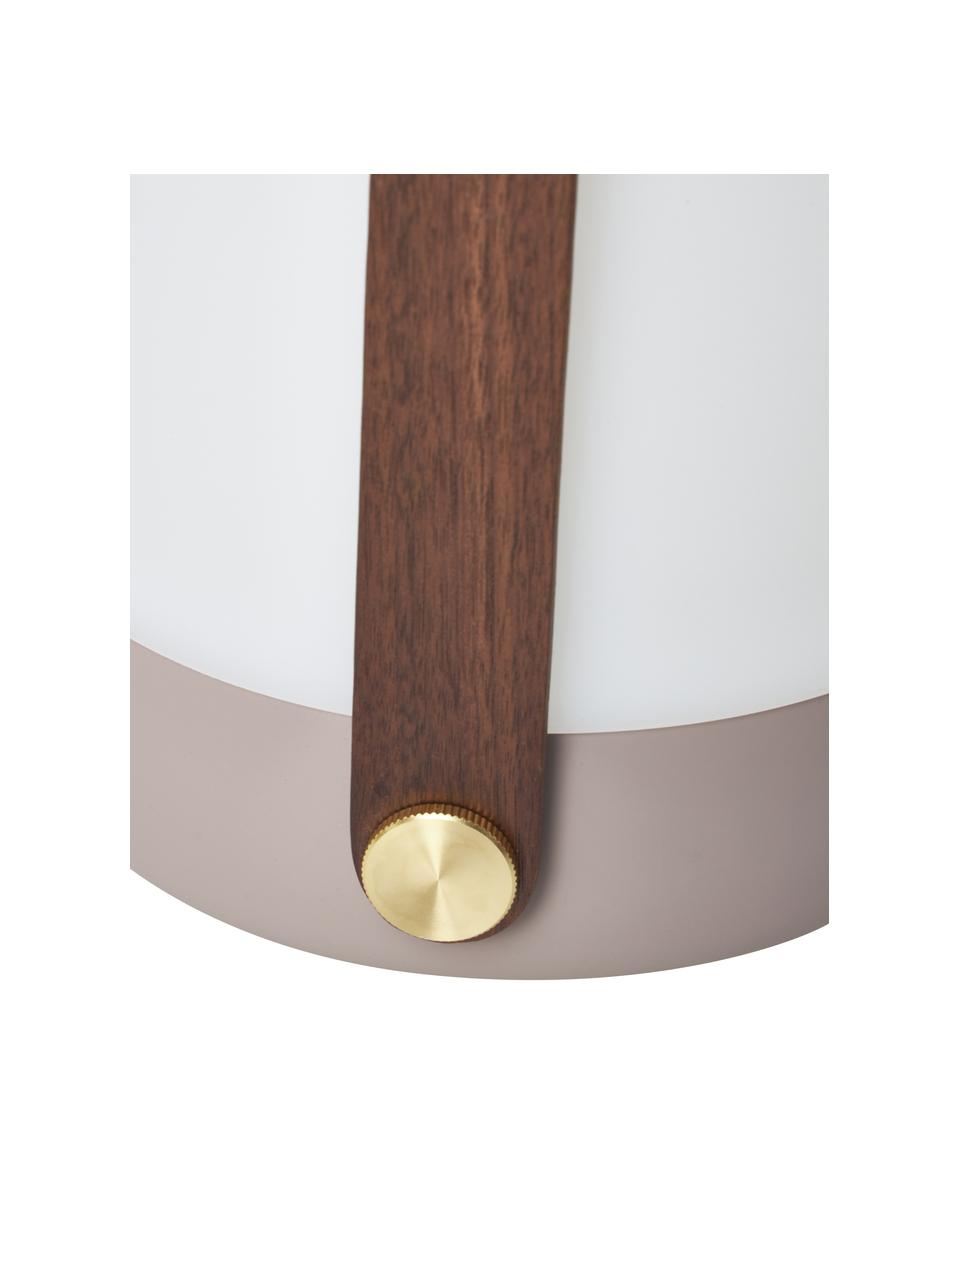 Mobile Dimmbare Aussentischlampe Lite-up, Lampenschirm: Kunststoff, Griff: Holz, Taupe, Ø 20 x H 26 cm